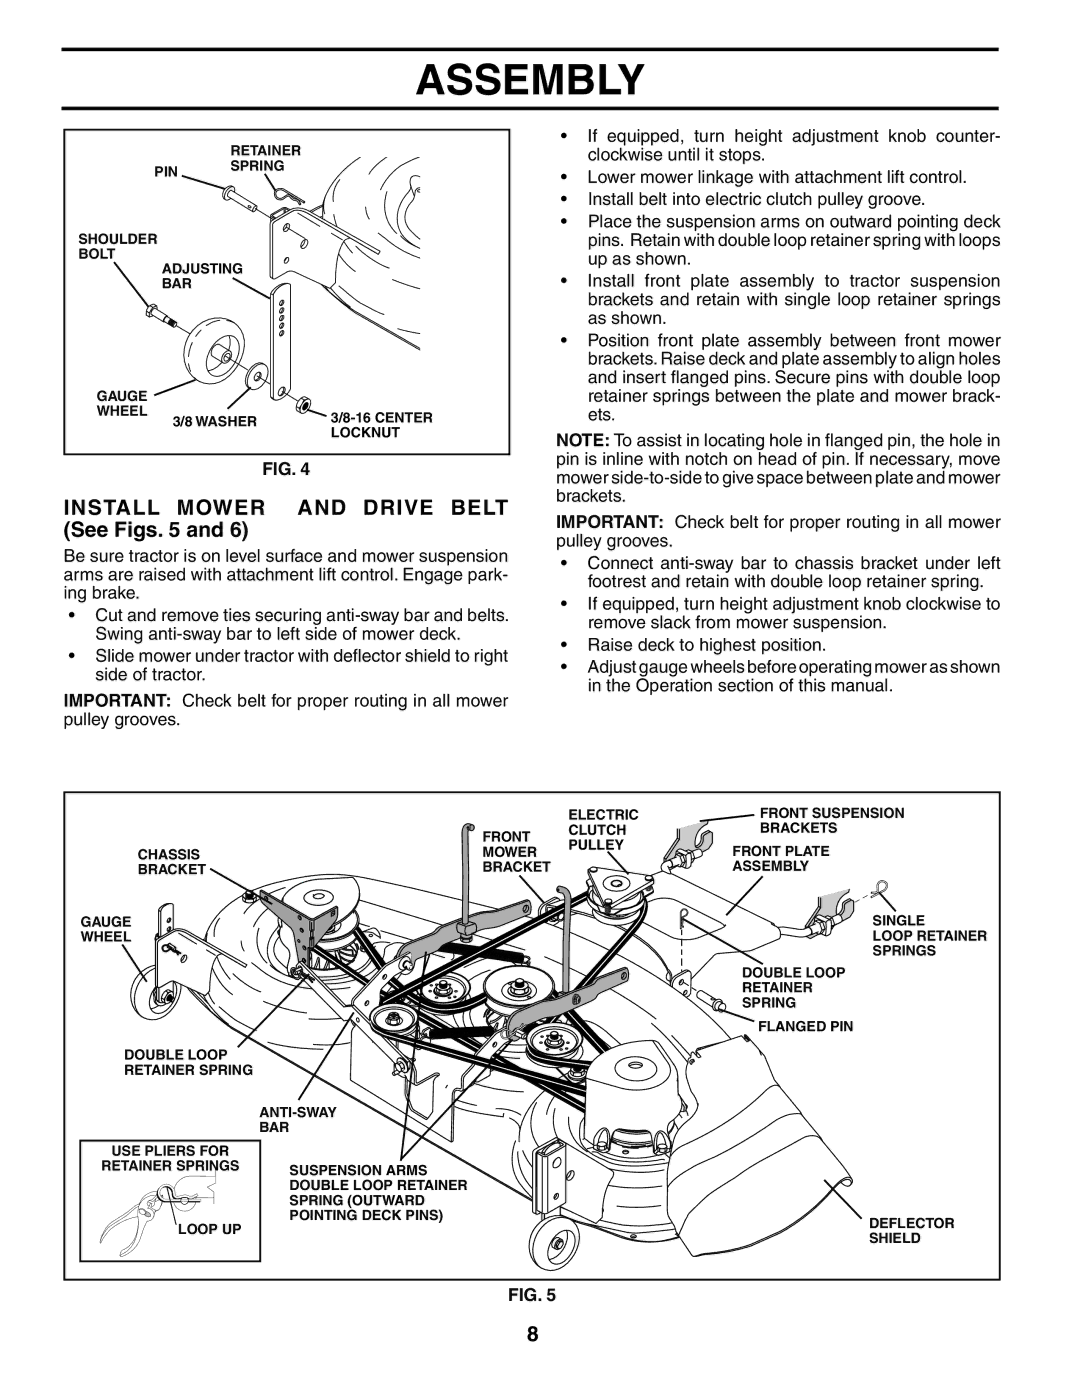 Poulan POGT20T48STA manual Install Mower and Drive Belt See Figs 